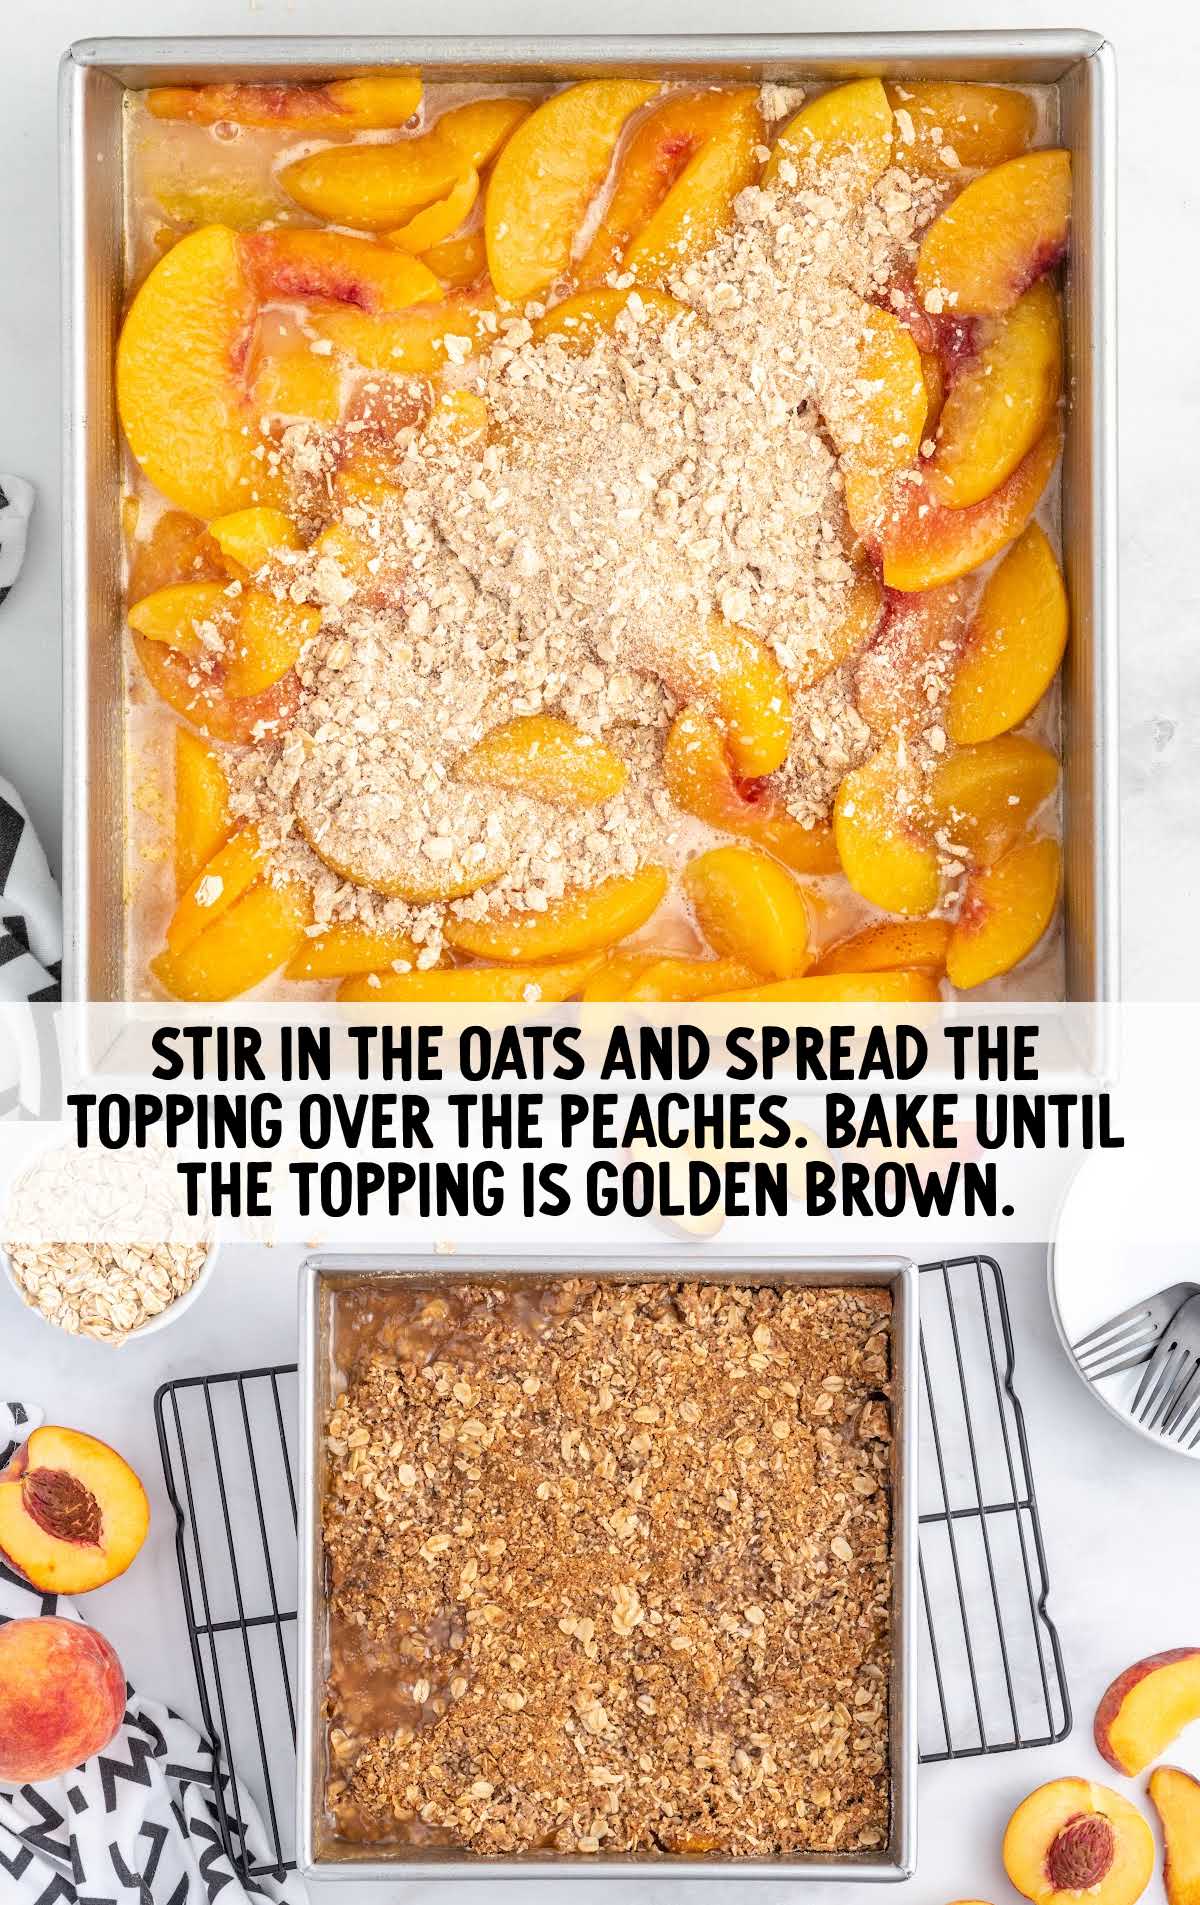 oats sprinkled over the peaches and baked until brown in a baking dish